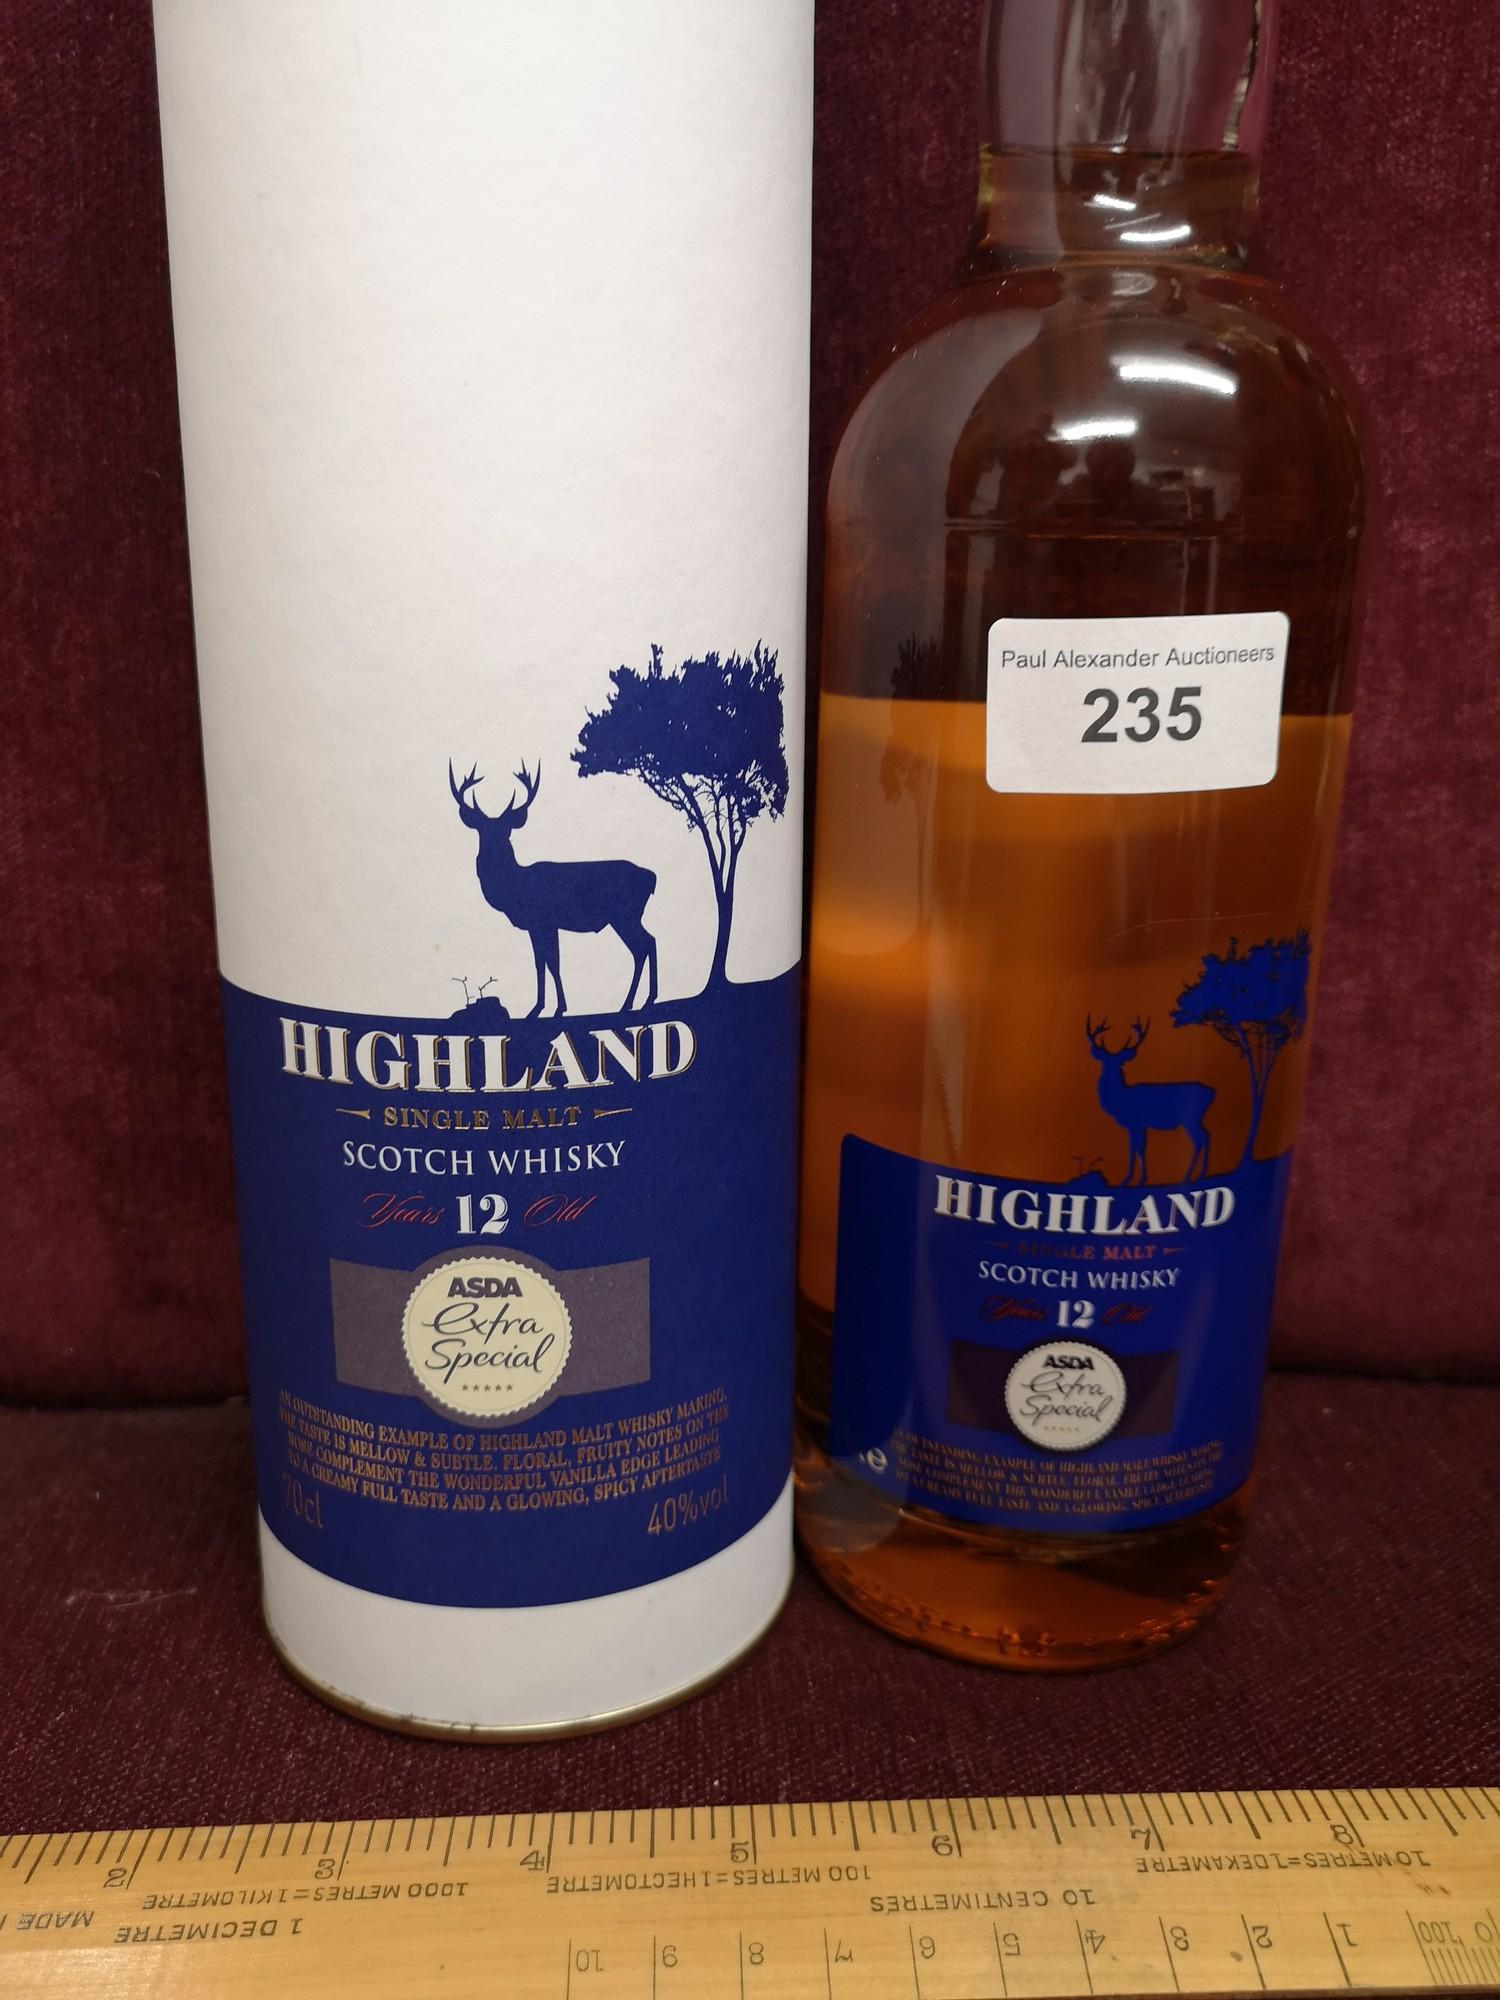 Bottle of Highland 12 year old single malt whisky 70cl full and sealed with display box.